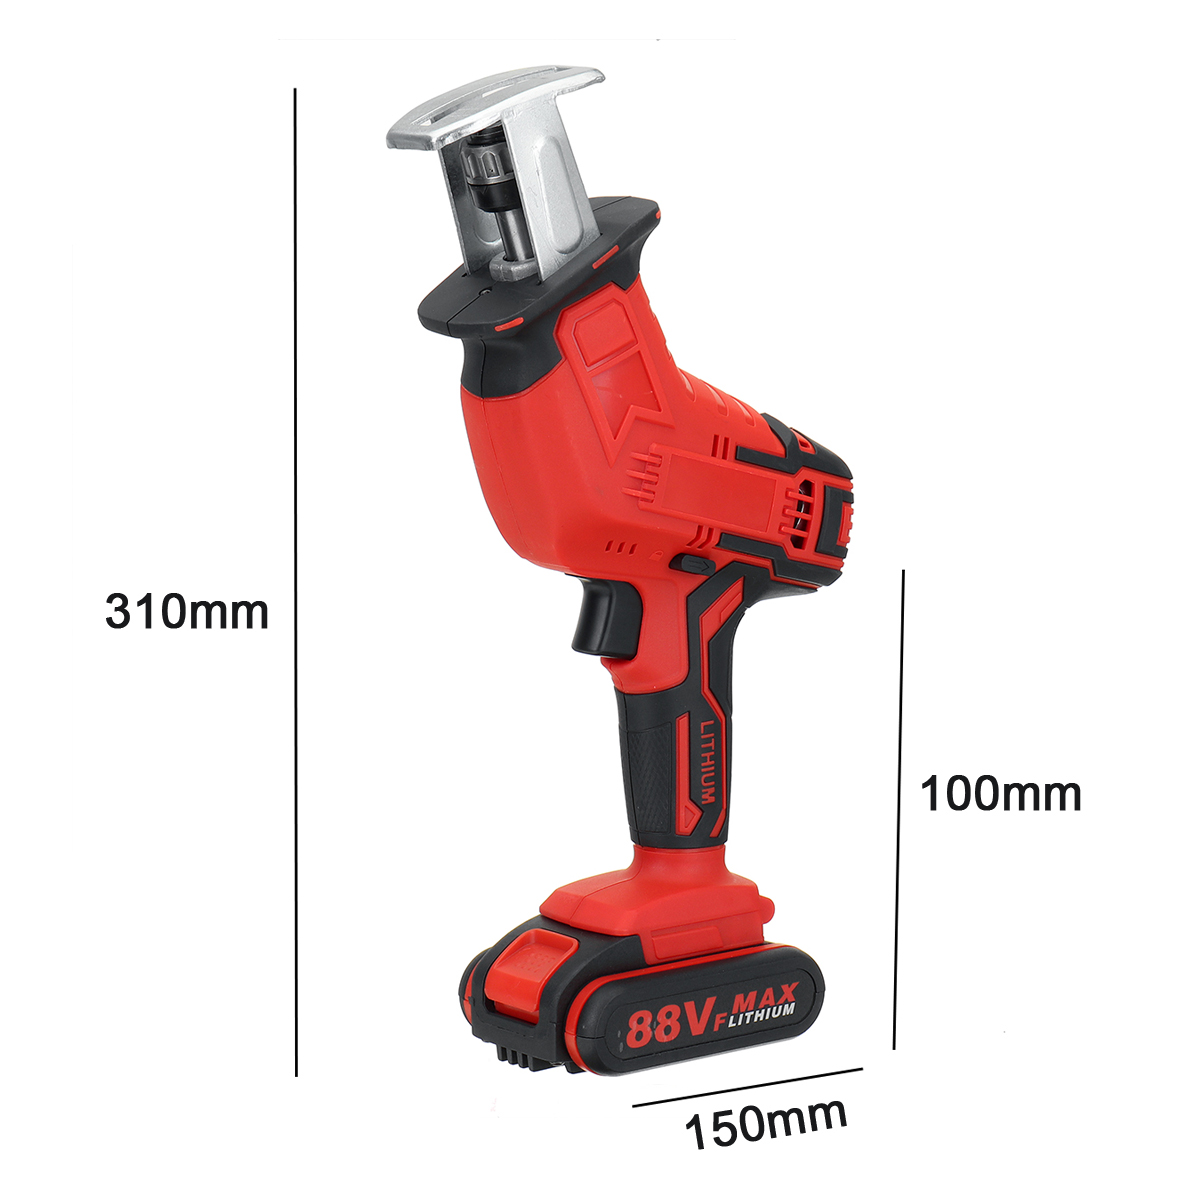 88VF-Electric-Reciprocating-Saws-Outdoor-Woodworking-Cordless-Portable-Wood-Cutting-Saw-1718639-6